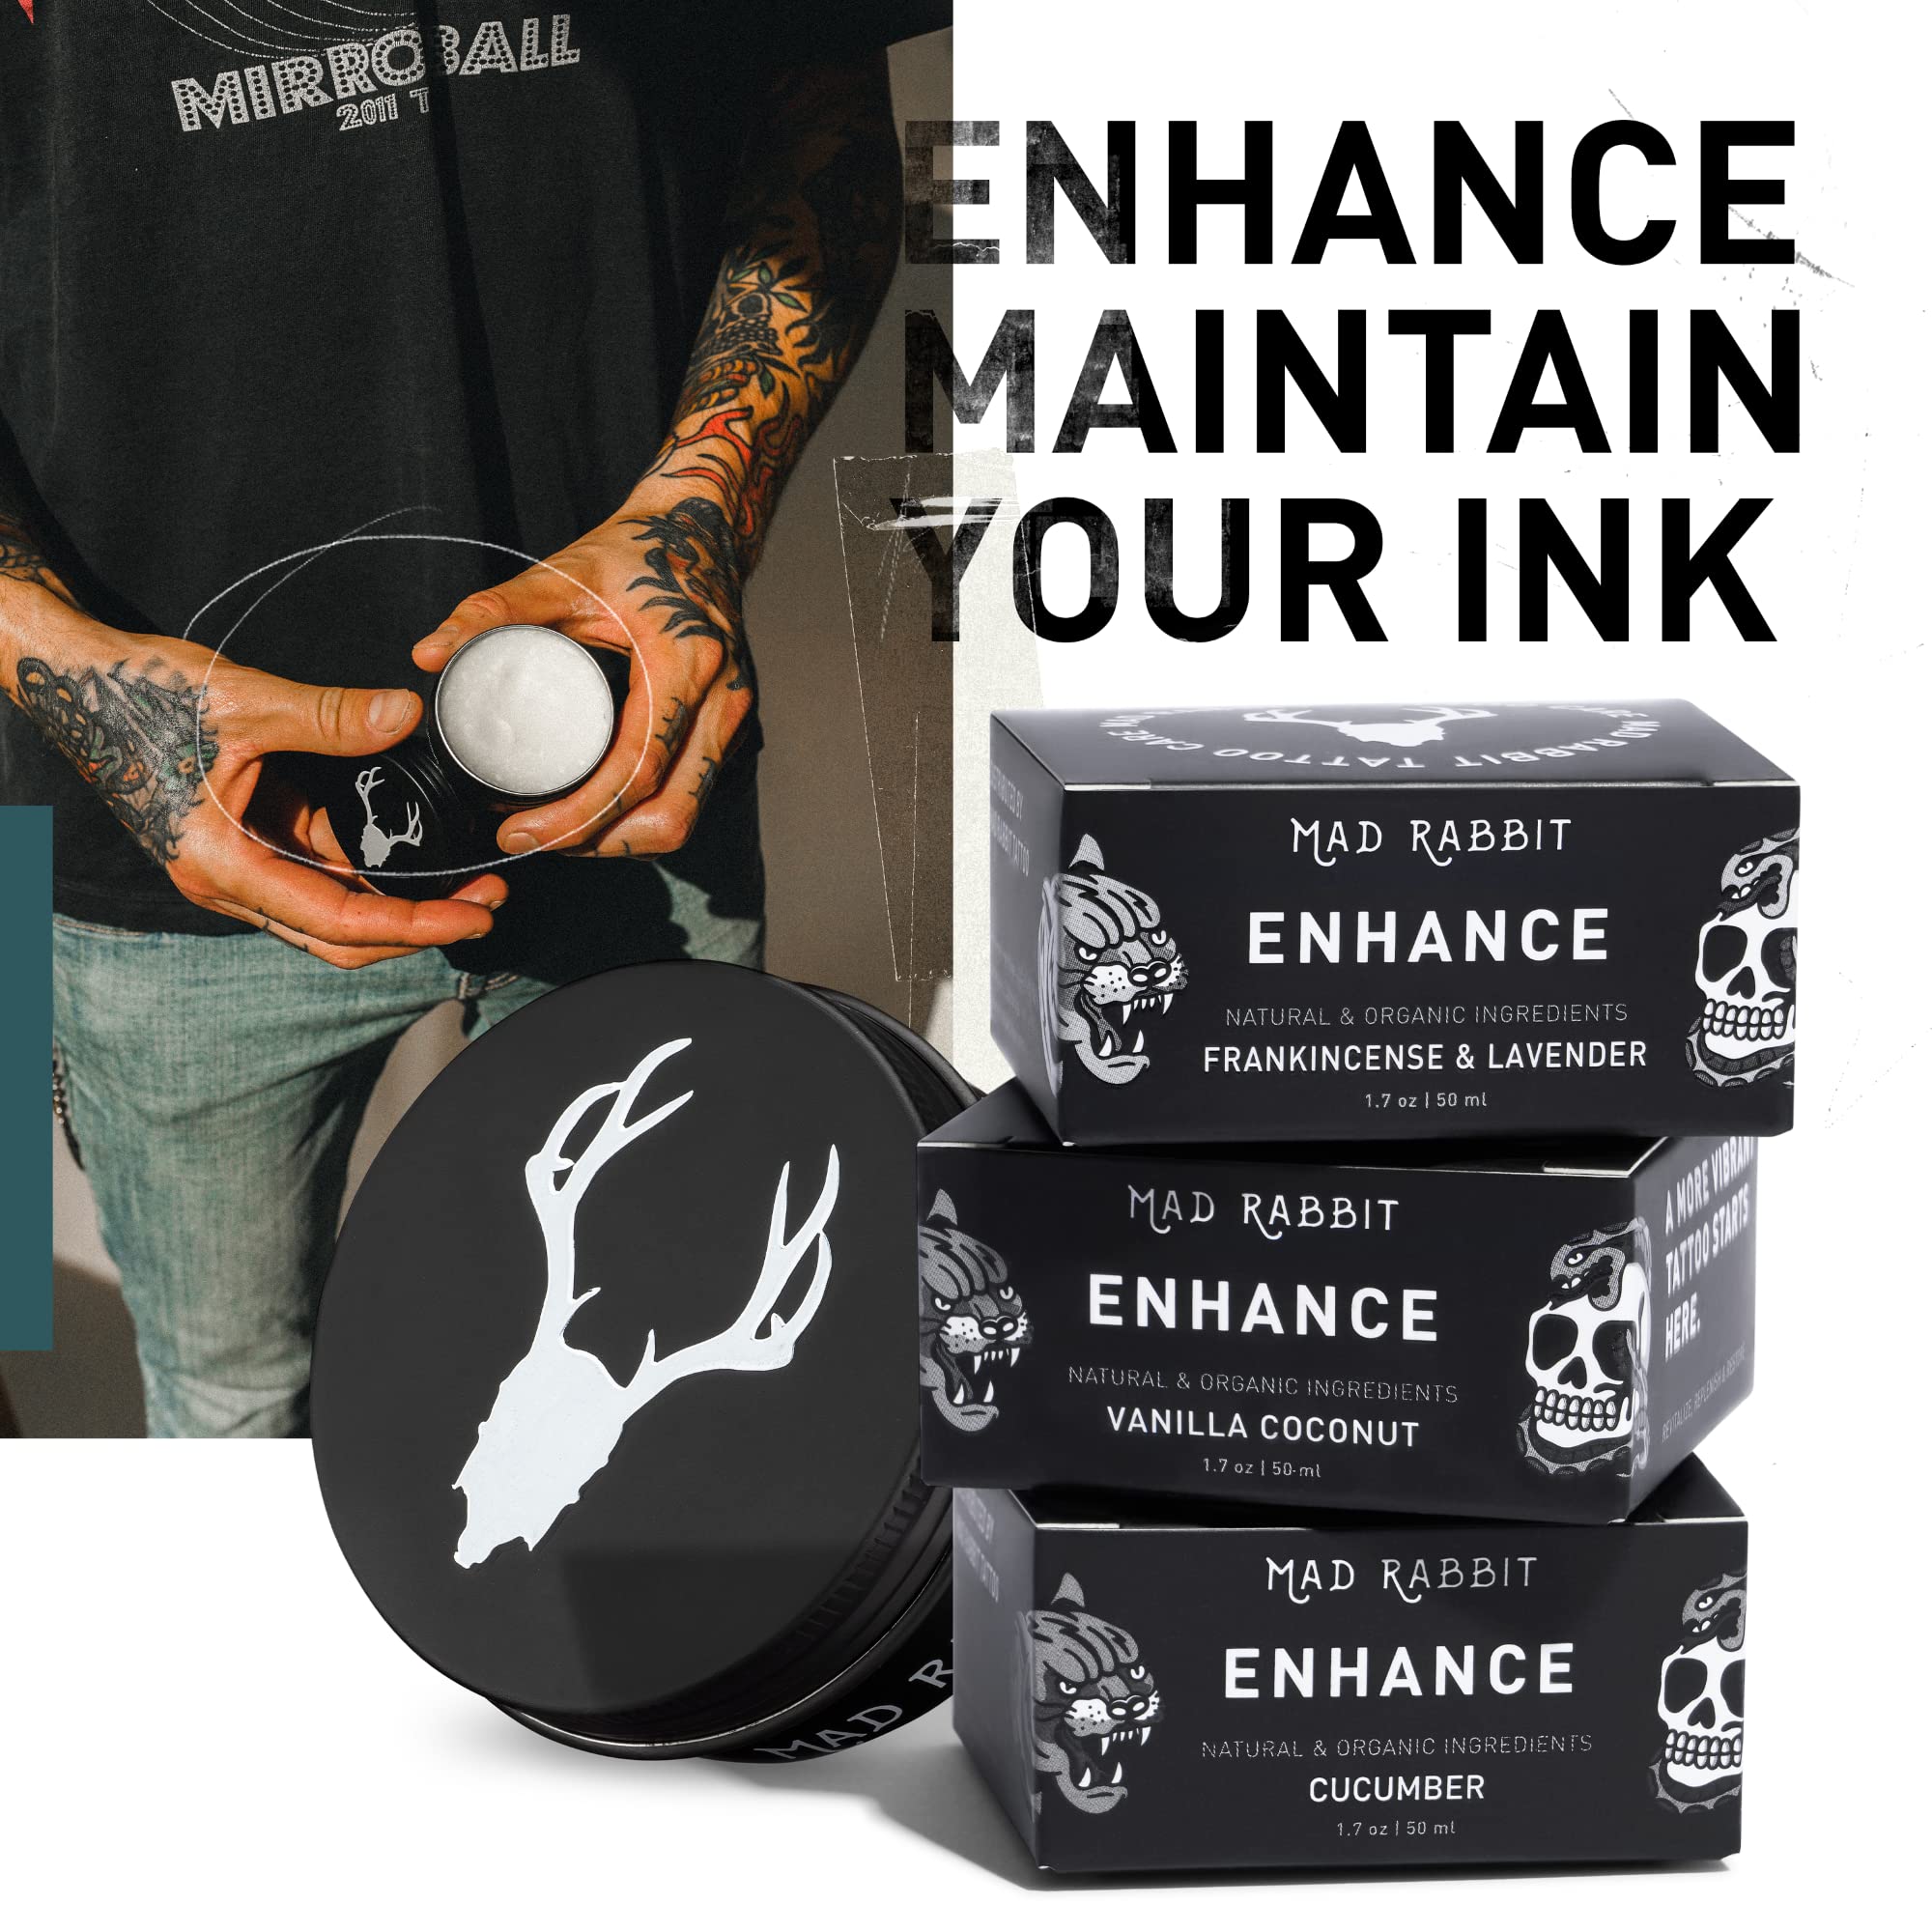 Mad Rabbit Tattoo Balm & Aftercare Cream- Color Enhancement that Revives Old Tattoos, Hydrates New Tattoos, Made With Natural Ingredients + Petroleum Free, Daily Tattoo Lotion Moisturizer & Brightener